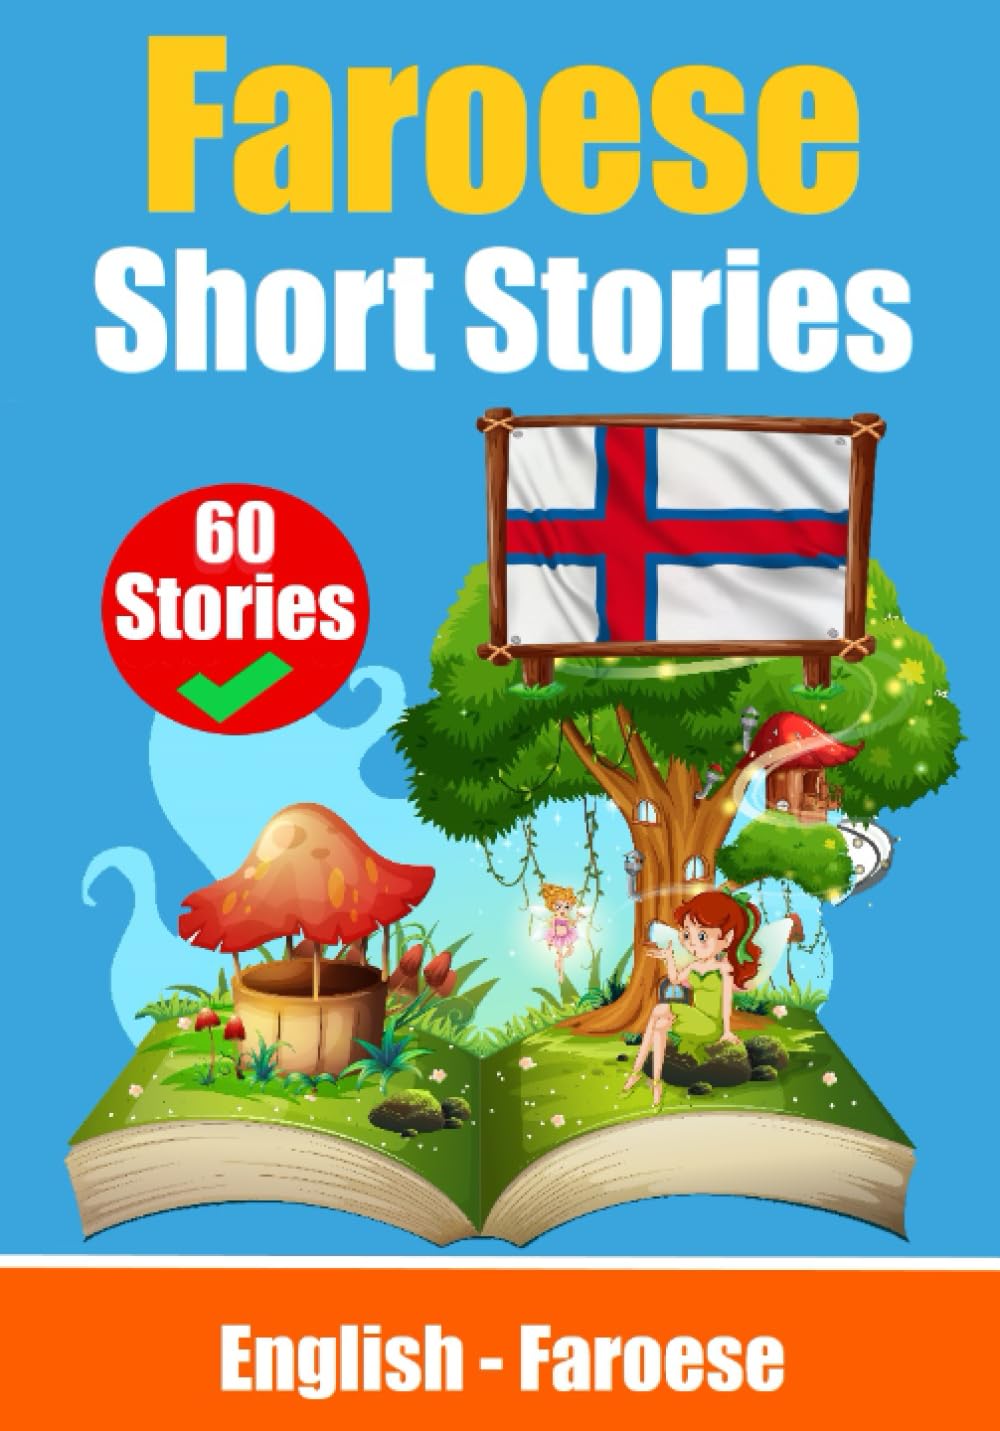 Short Stories in Faroese | English and Faroese Stories Side by Side